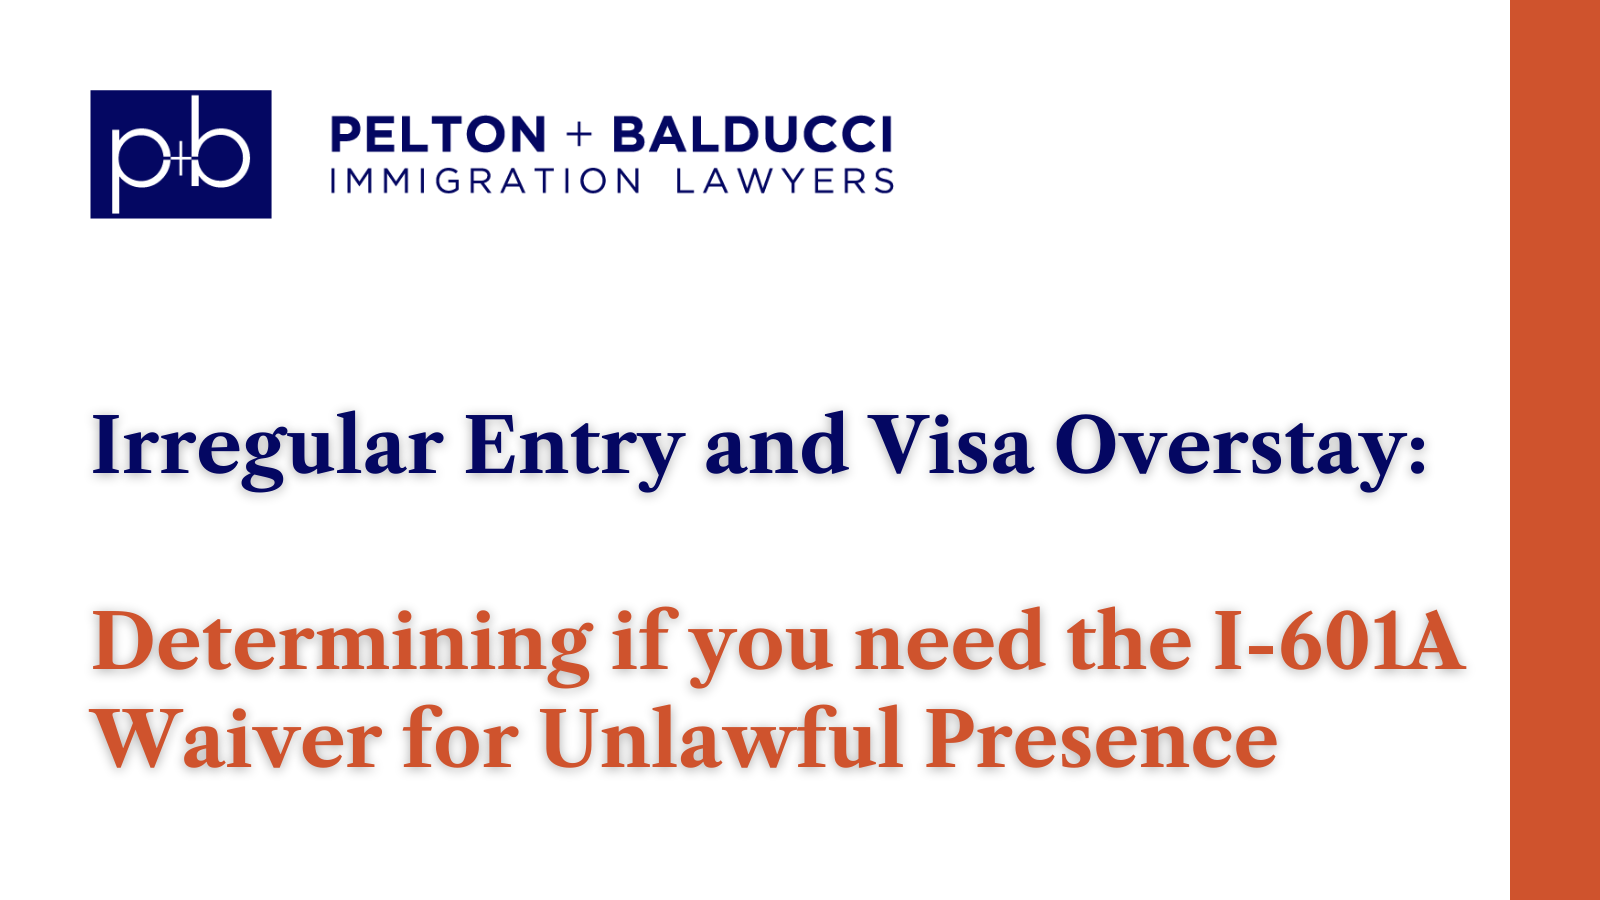 Visa Overstay I-601A Waiver for Unlawful Presence - all eligible Haitians present in the United States encouraged to apply - New Orleans Immigration Lawyers - Pelton Balducci